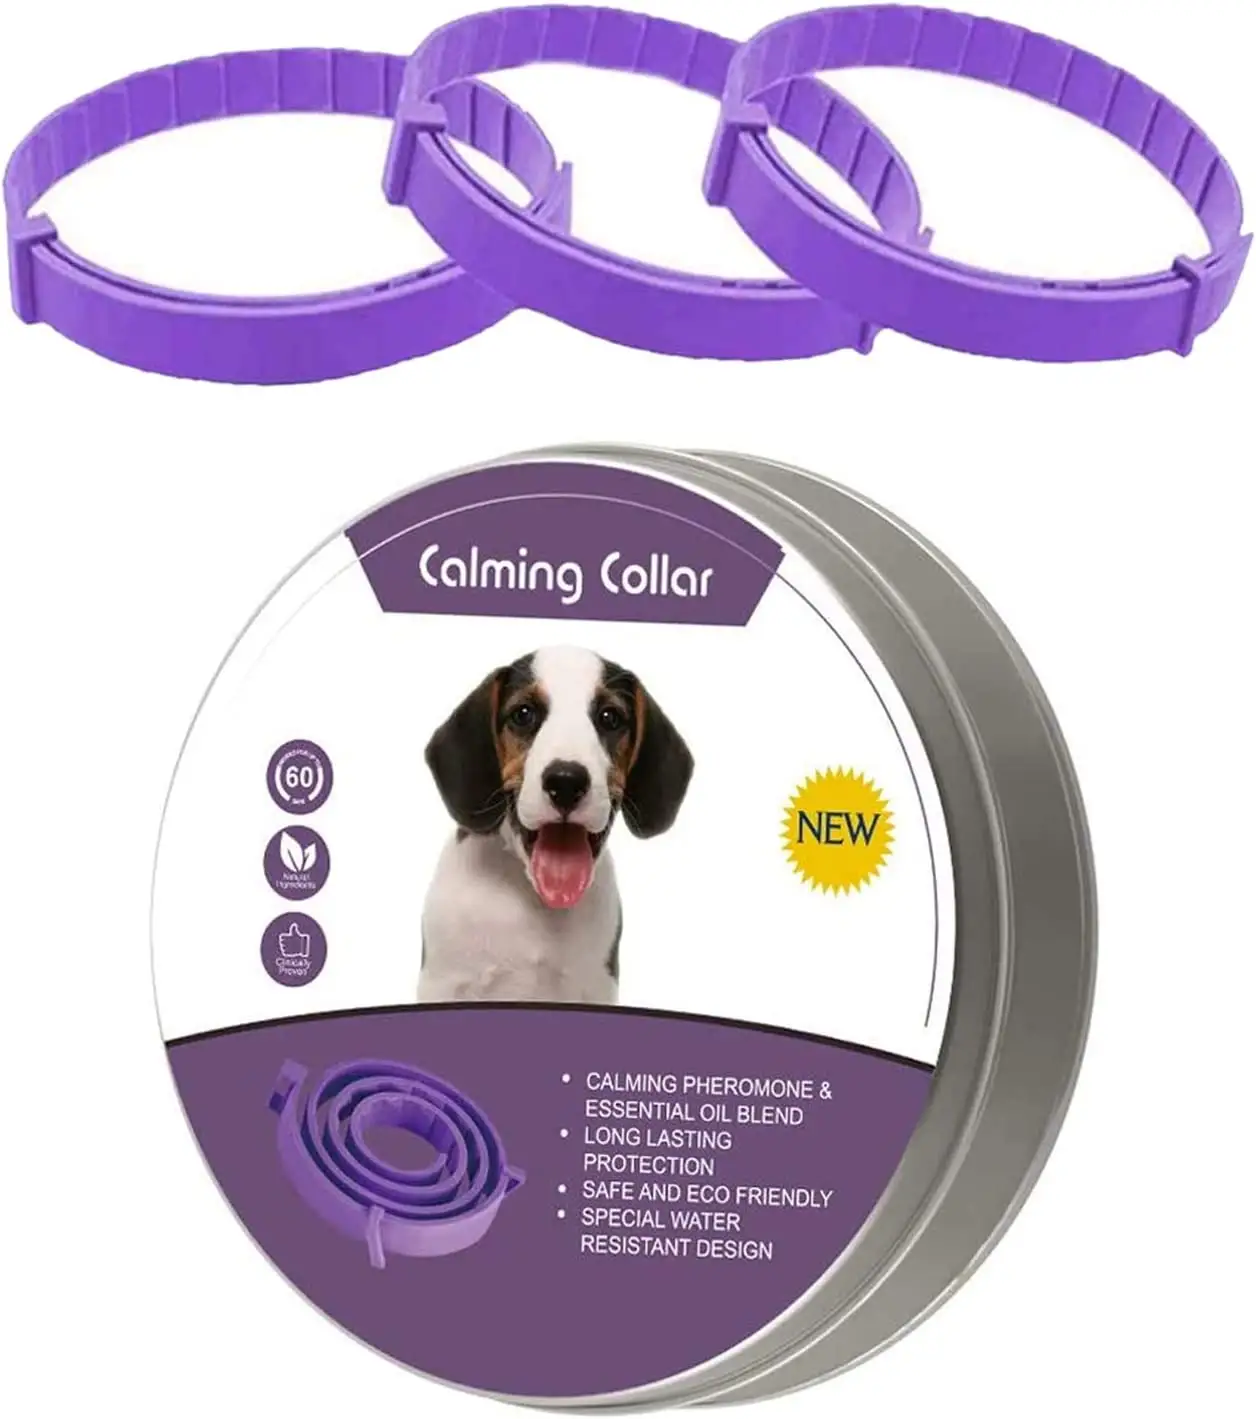 Wholesale Manufacturer Anxiety Reduce Adjustable Pet Pheromone Calming Collars for Dogs and Cats